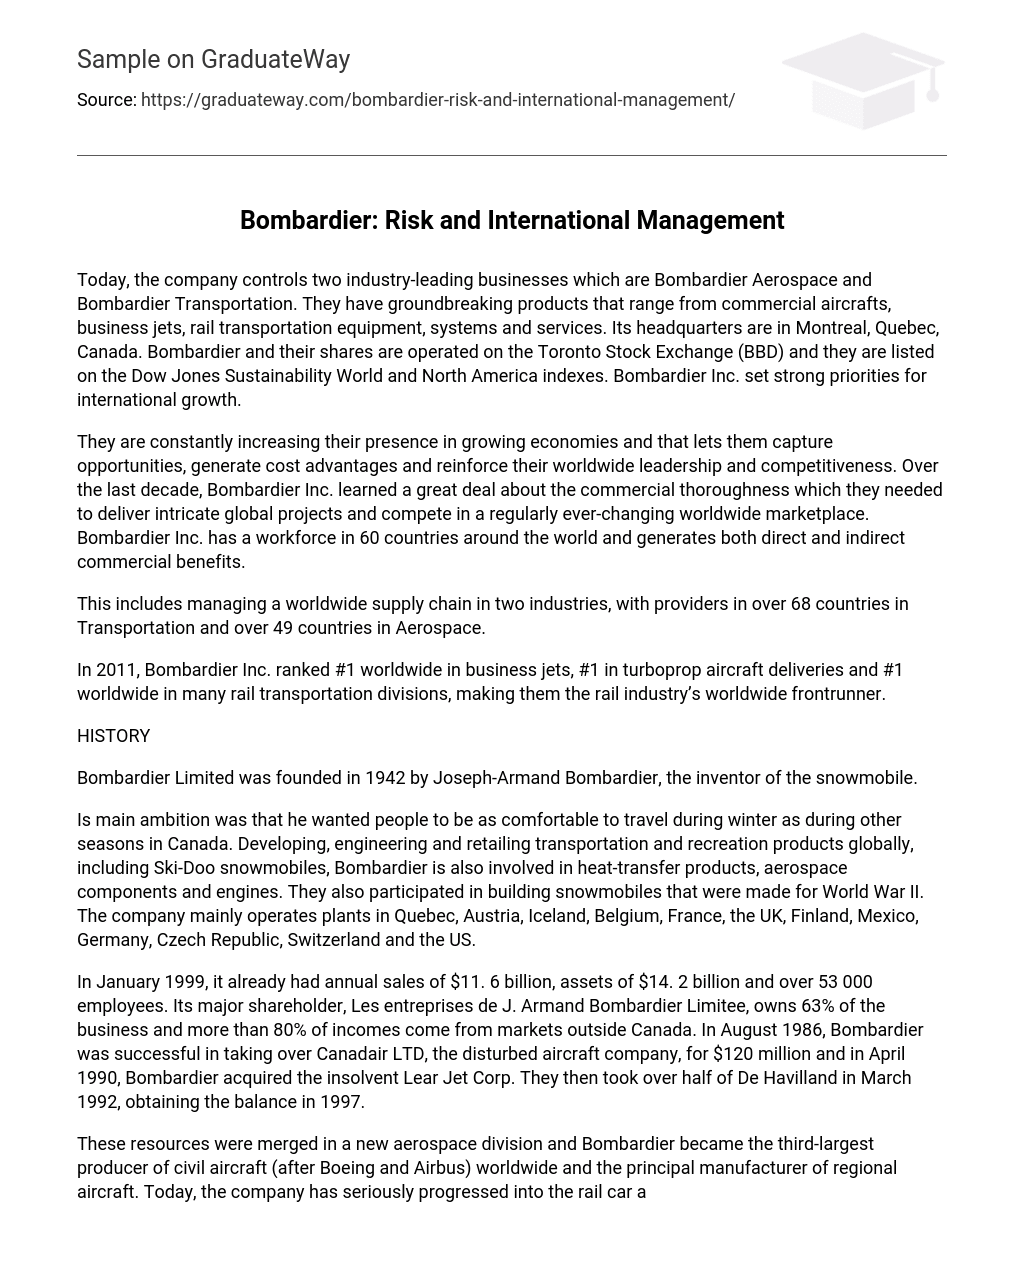 Bombardier: Risk and International Management